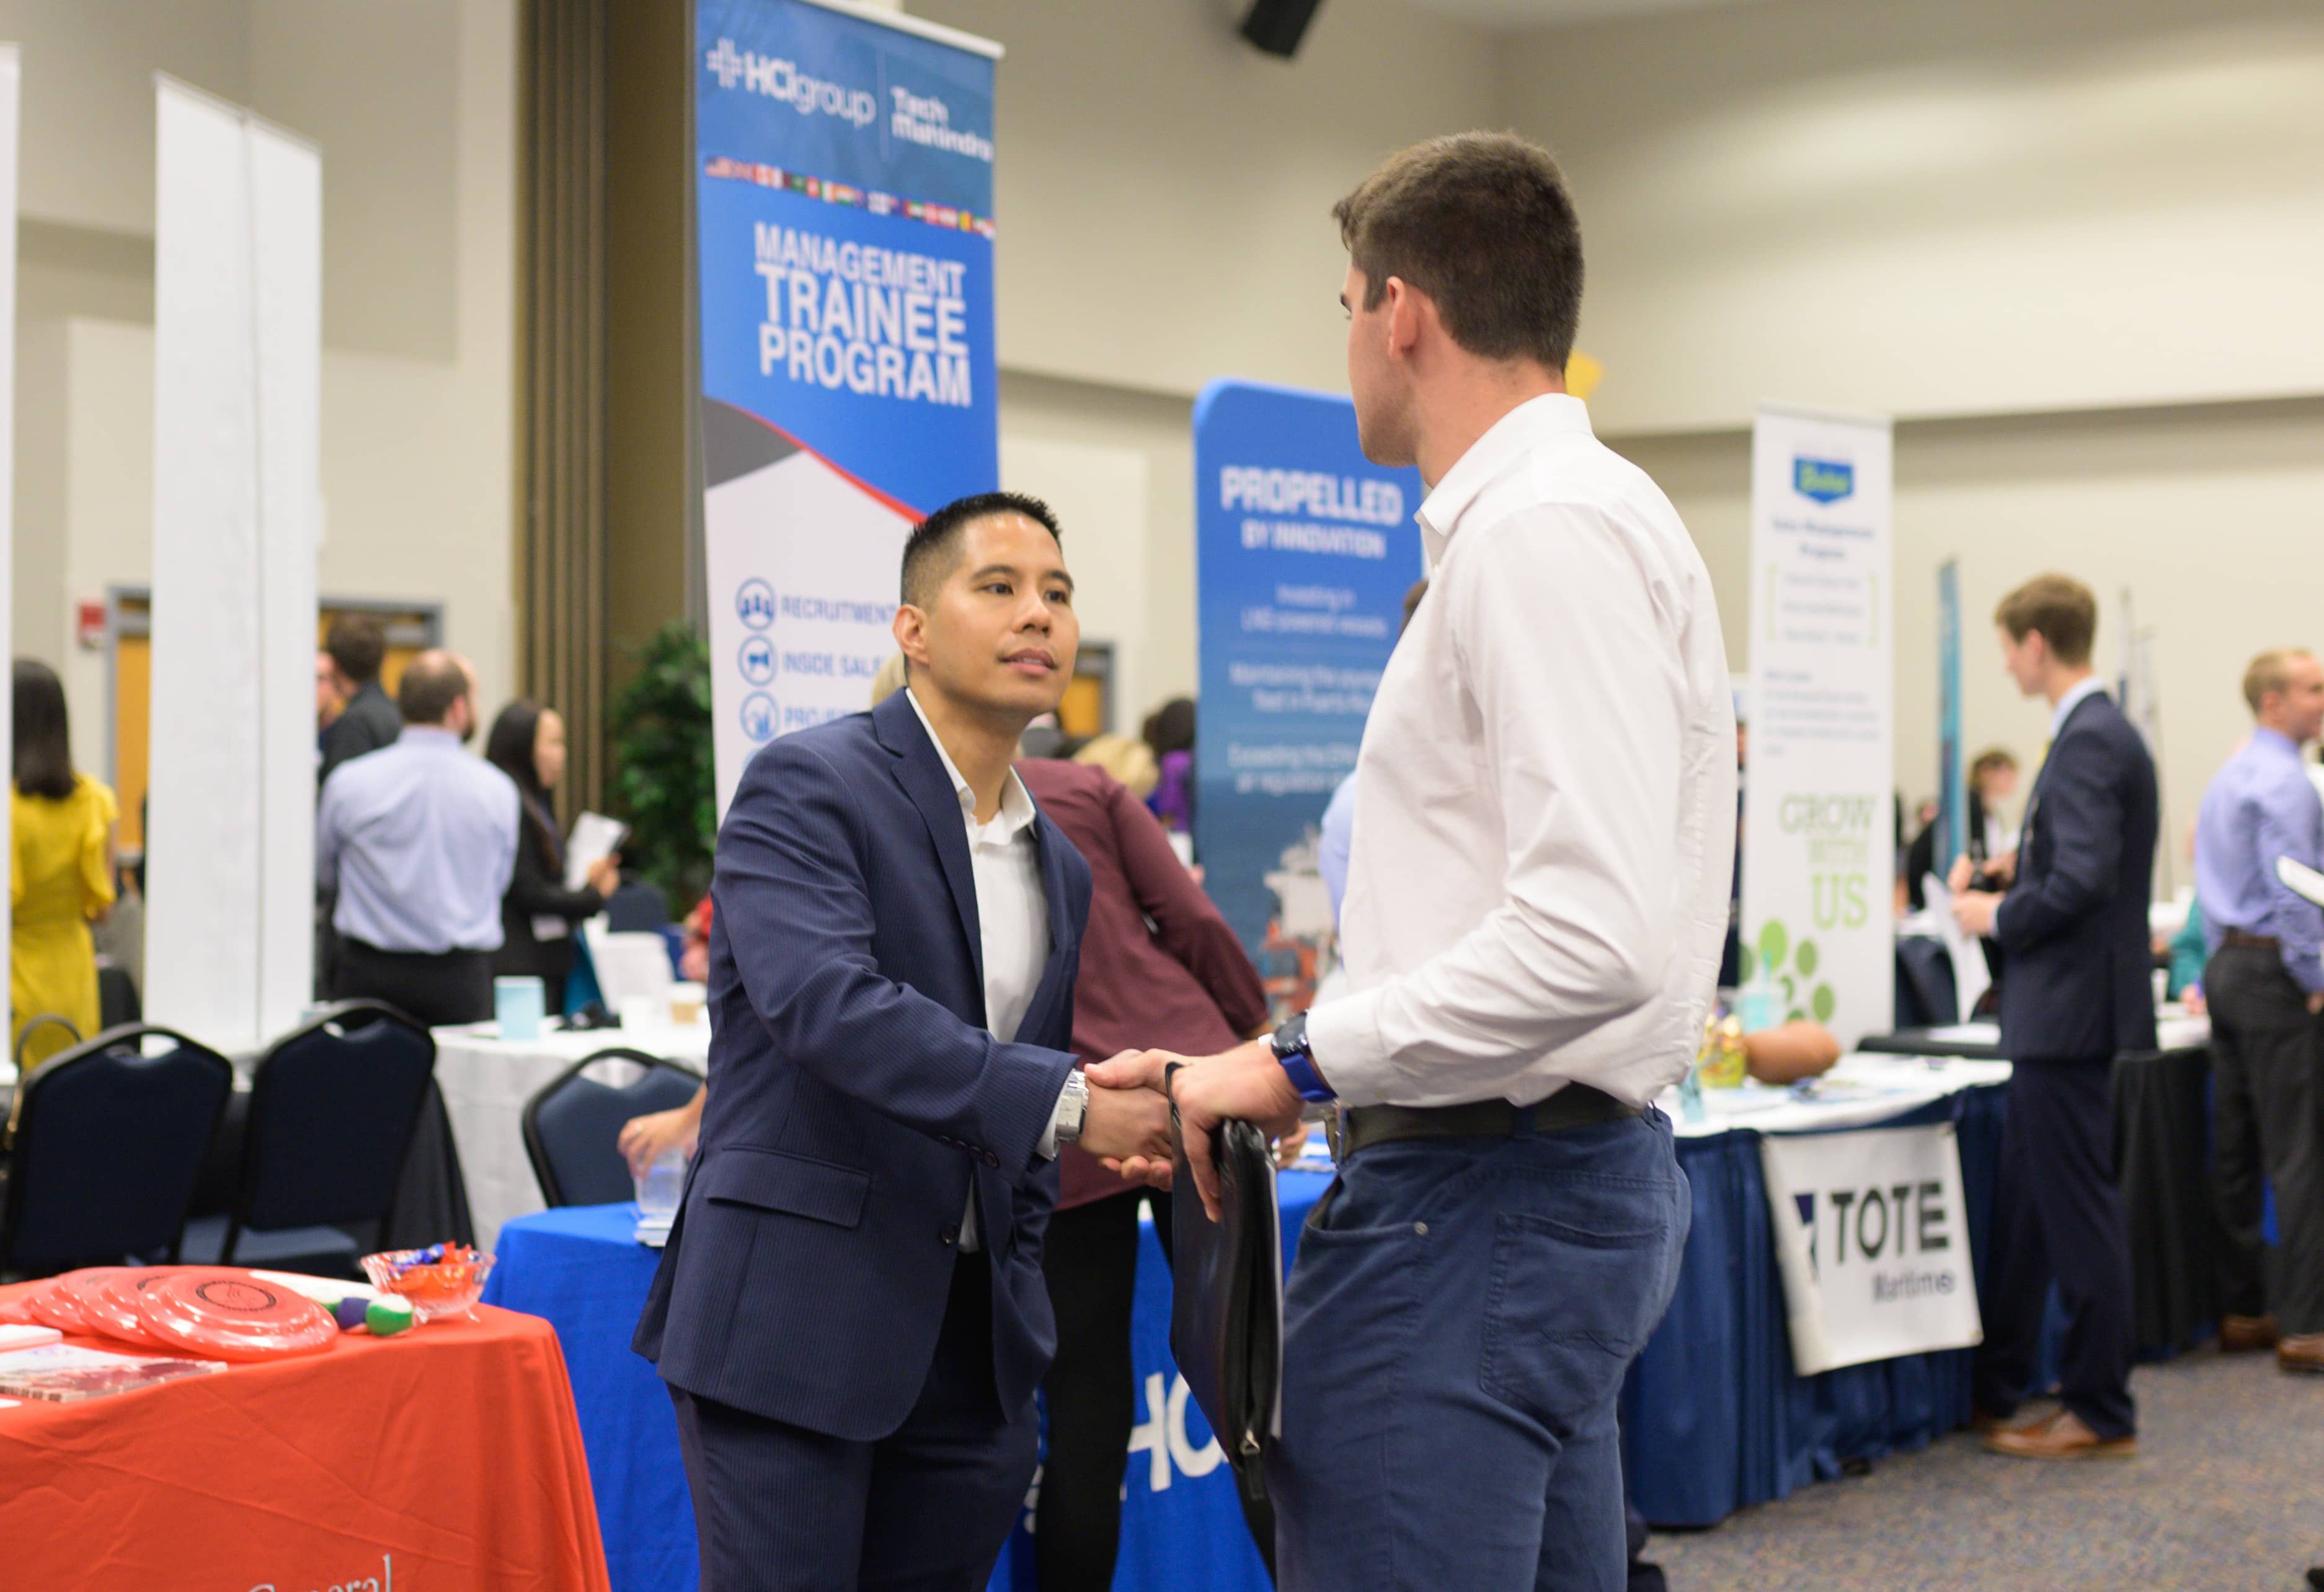 Two people shaking hands at the career fair